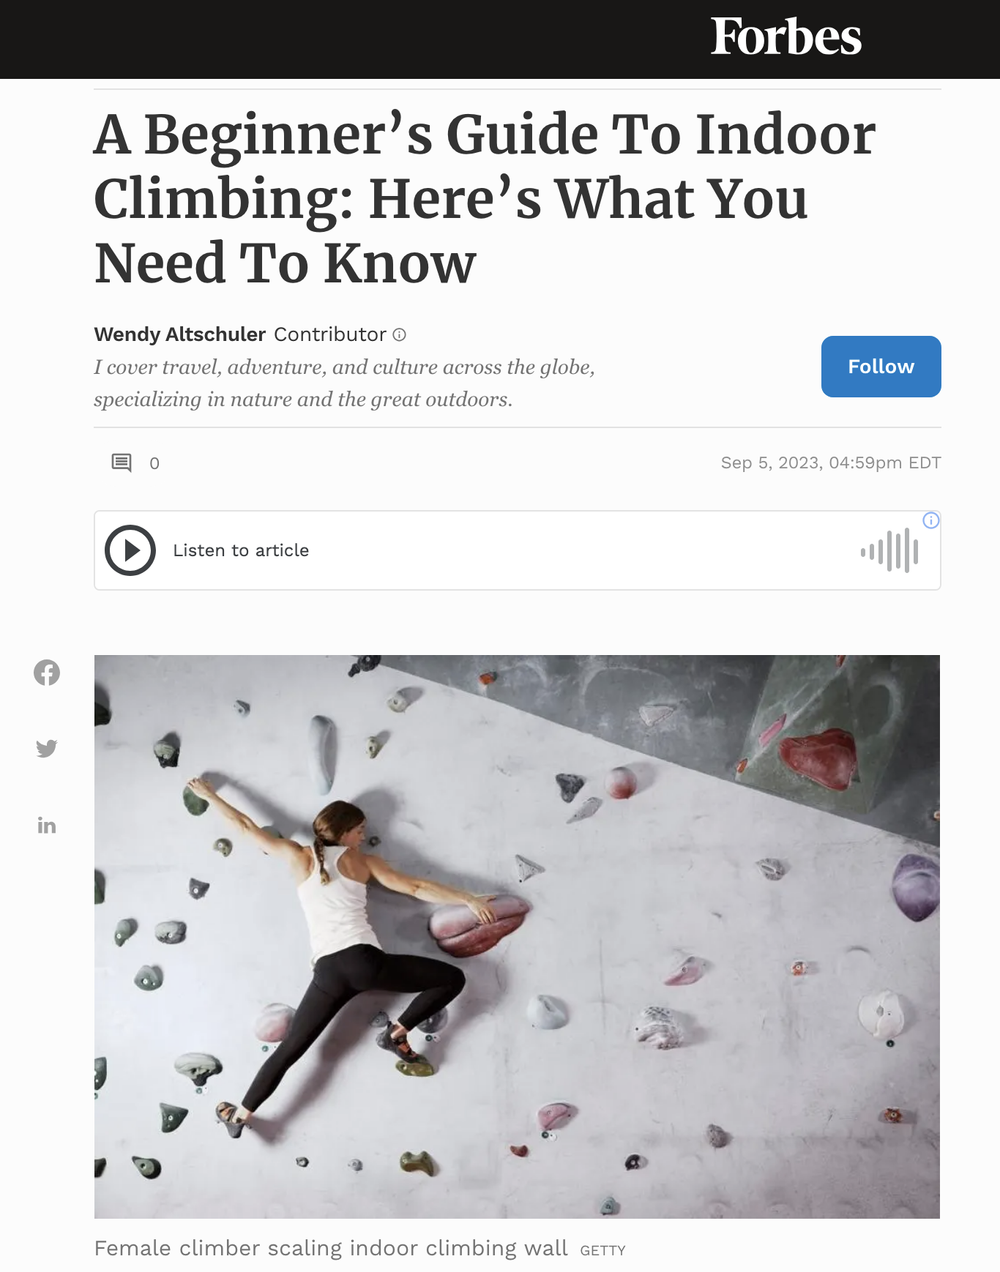 A Beginner’s Guide To Indoor Climbing: Here’s What You Need To Know